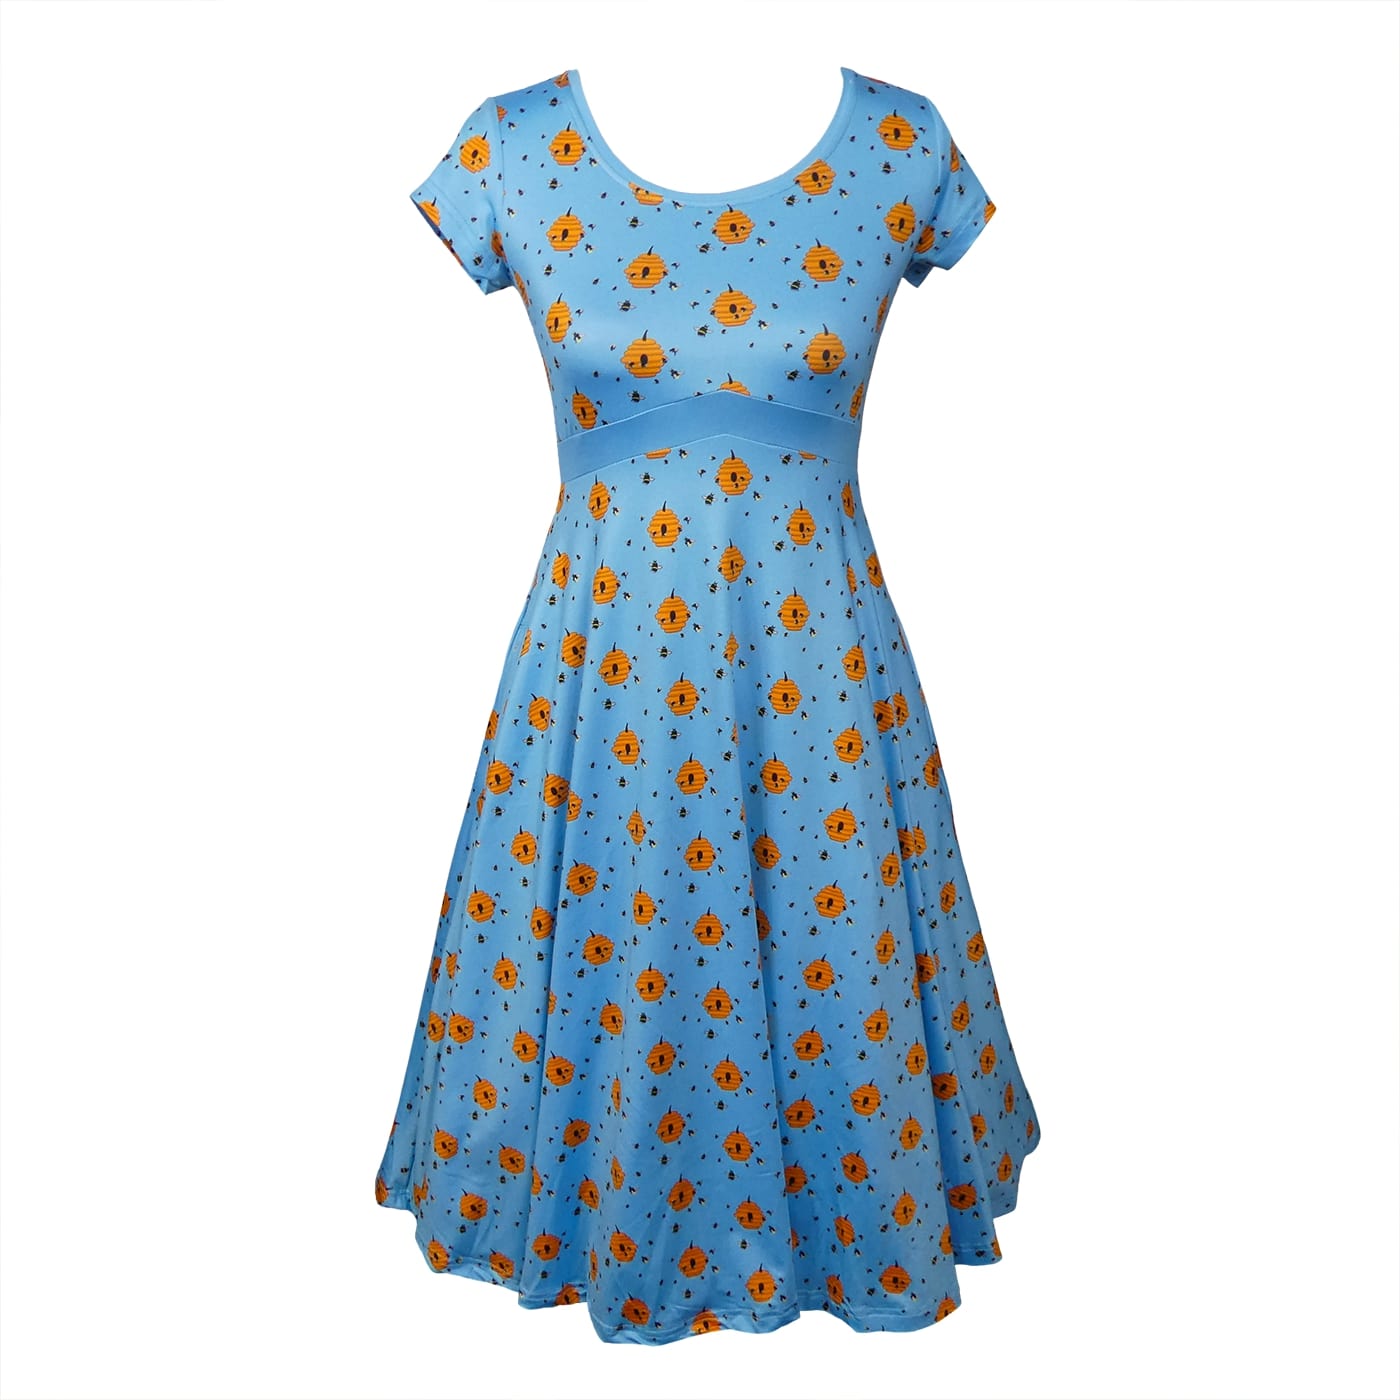 Hive Tea Dress by RainbowsAndFairies.com (Beehive - Bees - Bumblebee - Honey - Dress With Pockets - Rockabilly - Vintage Inspired - Rock & Roll) - SKU: CL_TEADR_BHIVE_ORG - Pic 01